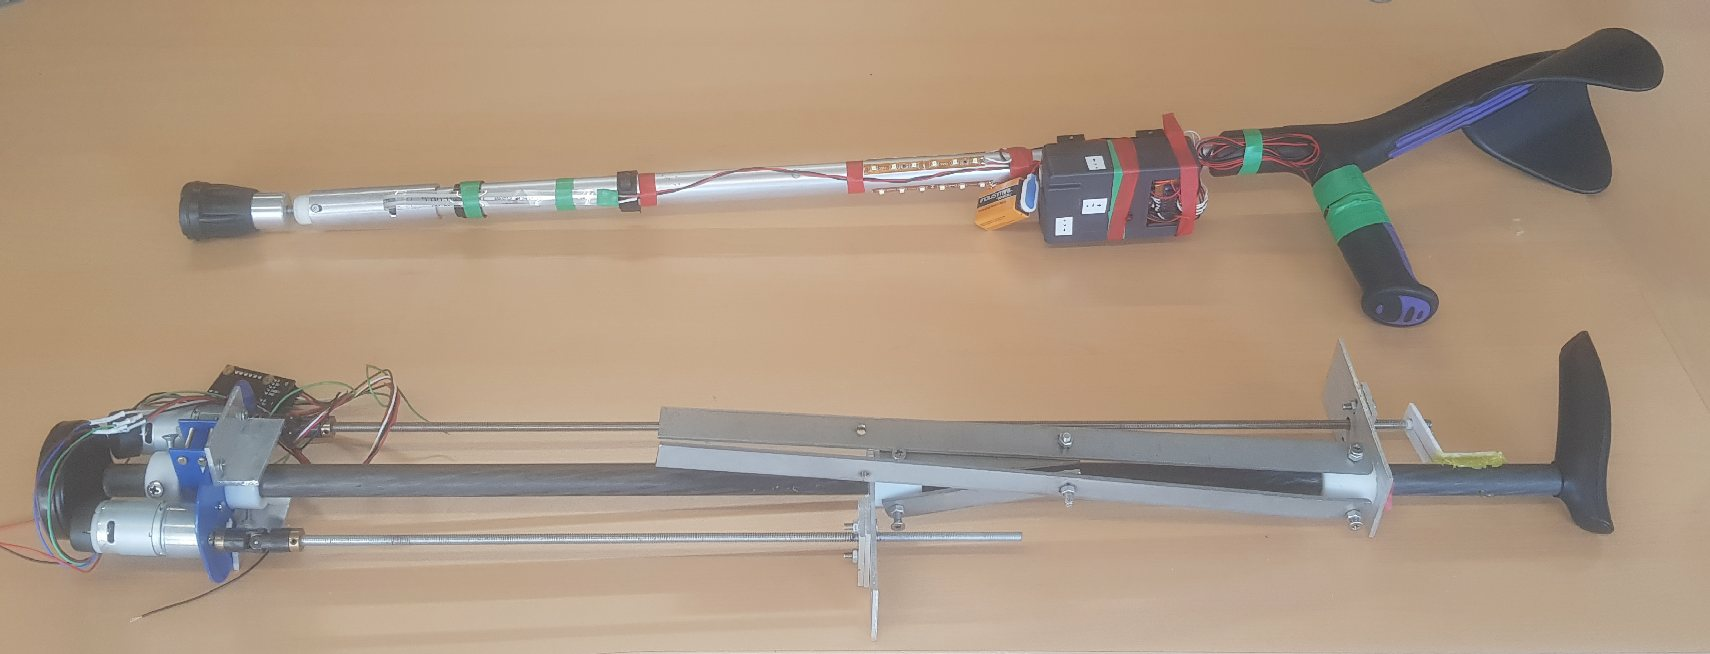 The photos shows 2 canes that may be used for walking analysis and the other one that is able to stand up after having fallen down